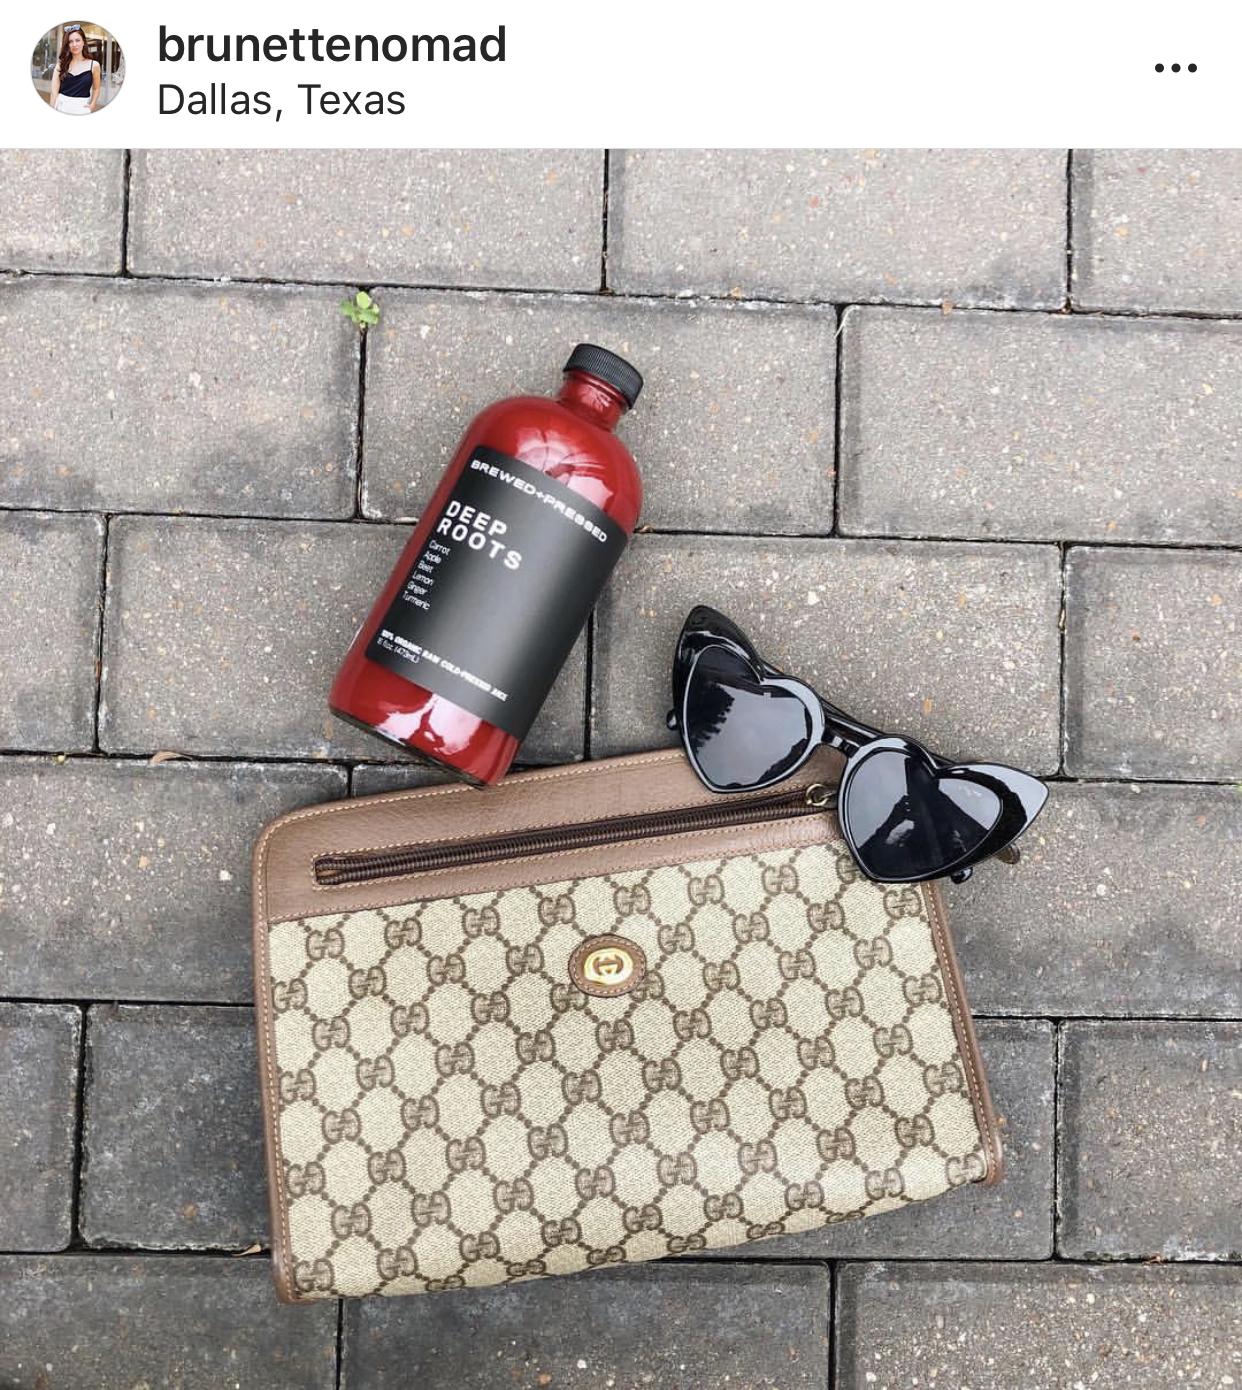 Dallas fashion blogger shares her recent friday favorites - designer dupes, healthy treats, beauty essentials, and more 